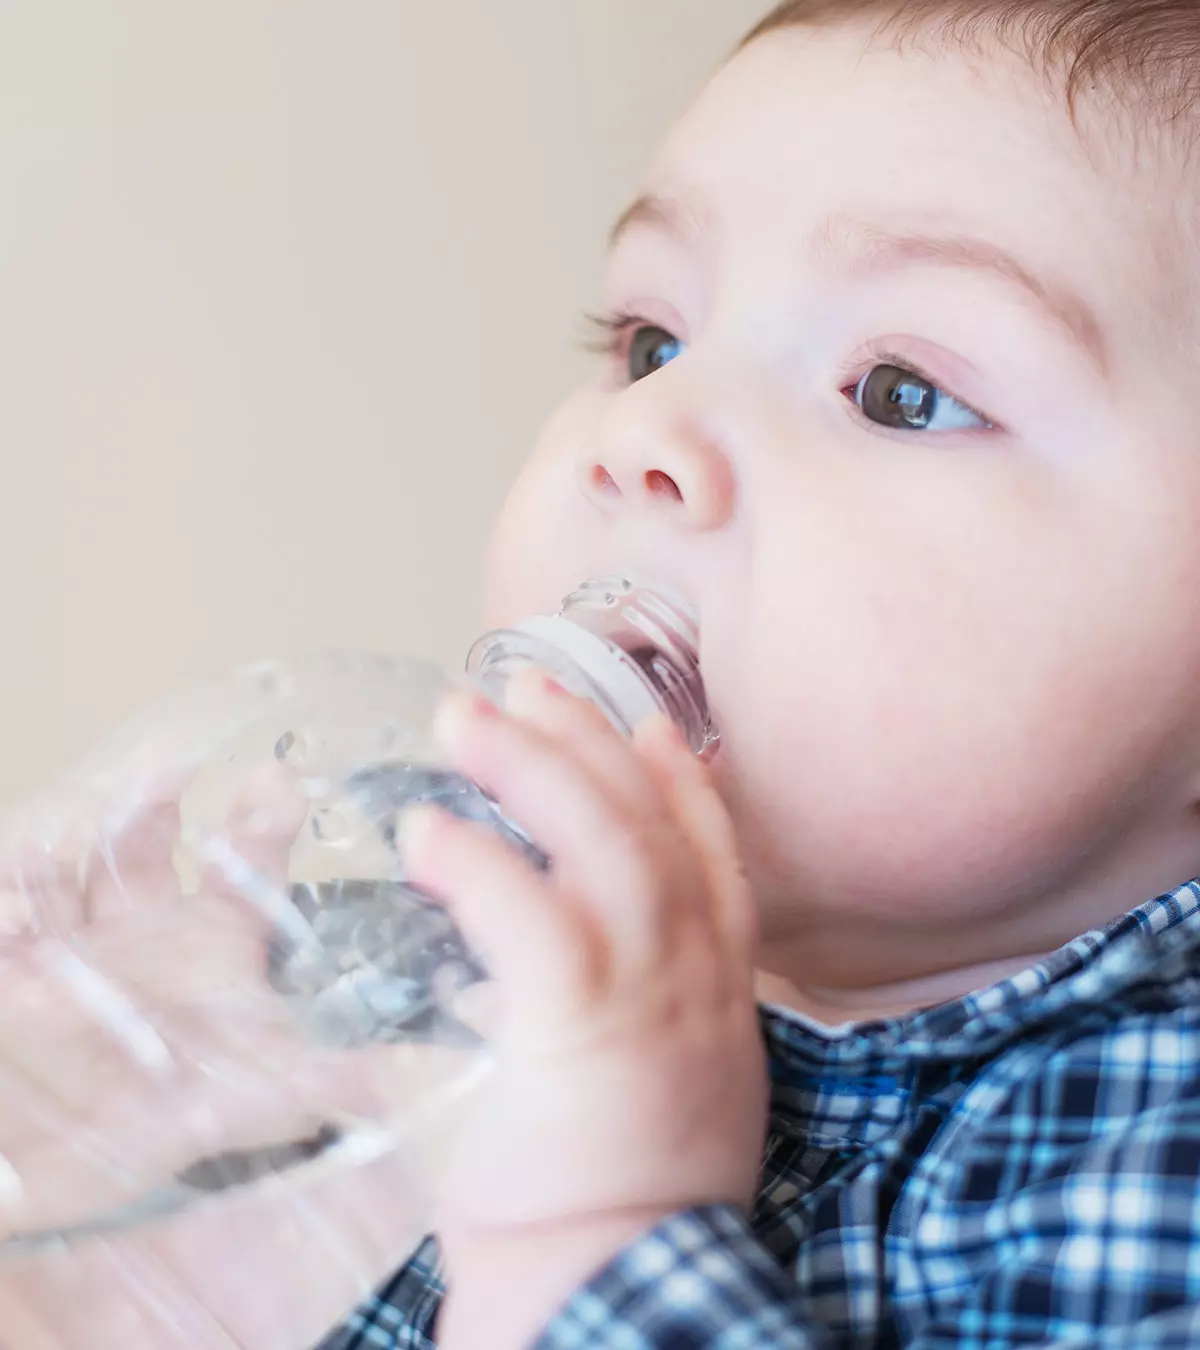 Bottled-Water-For-Babies-When-Can-They-Drink-It-And-How-Does-It-Differ-From-Baby-Water